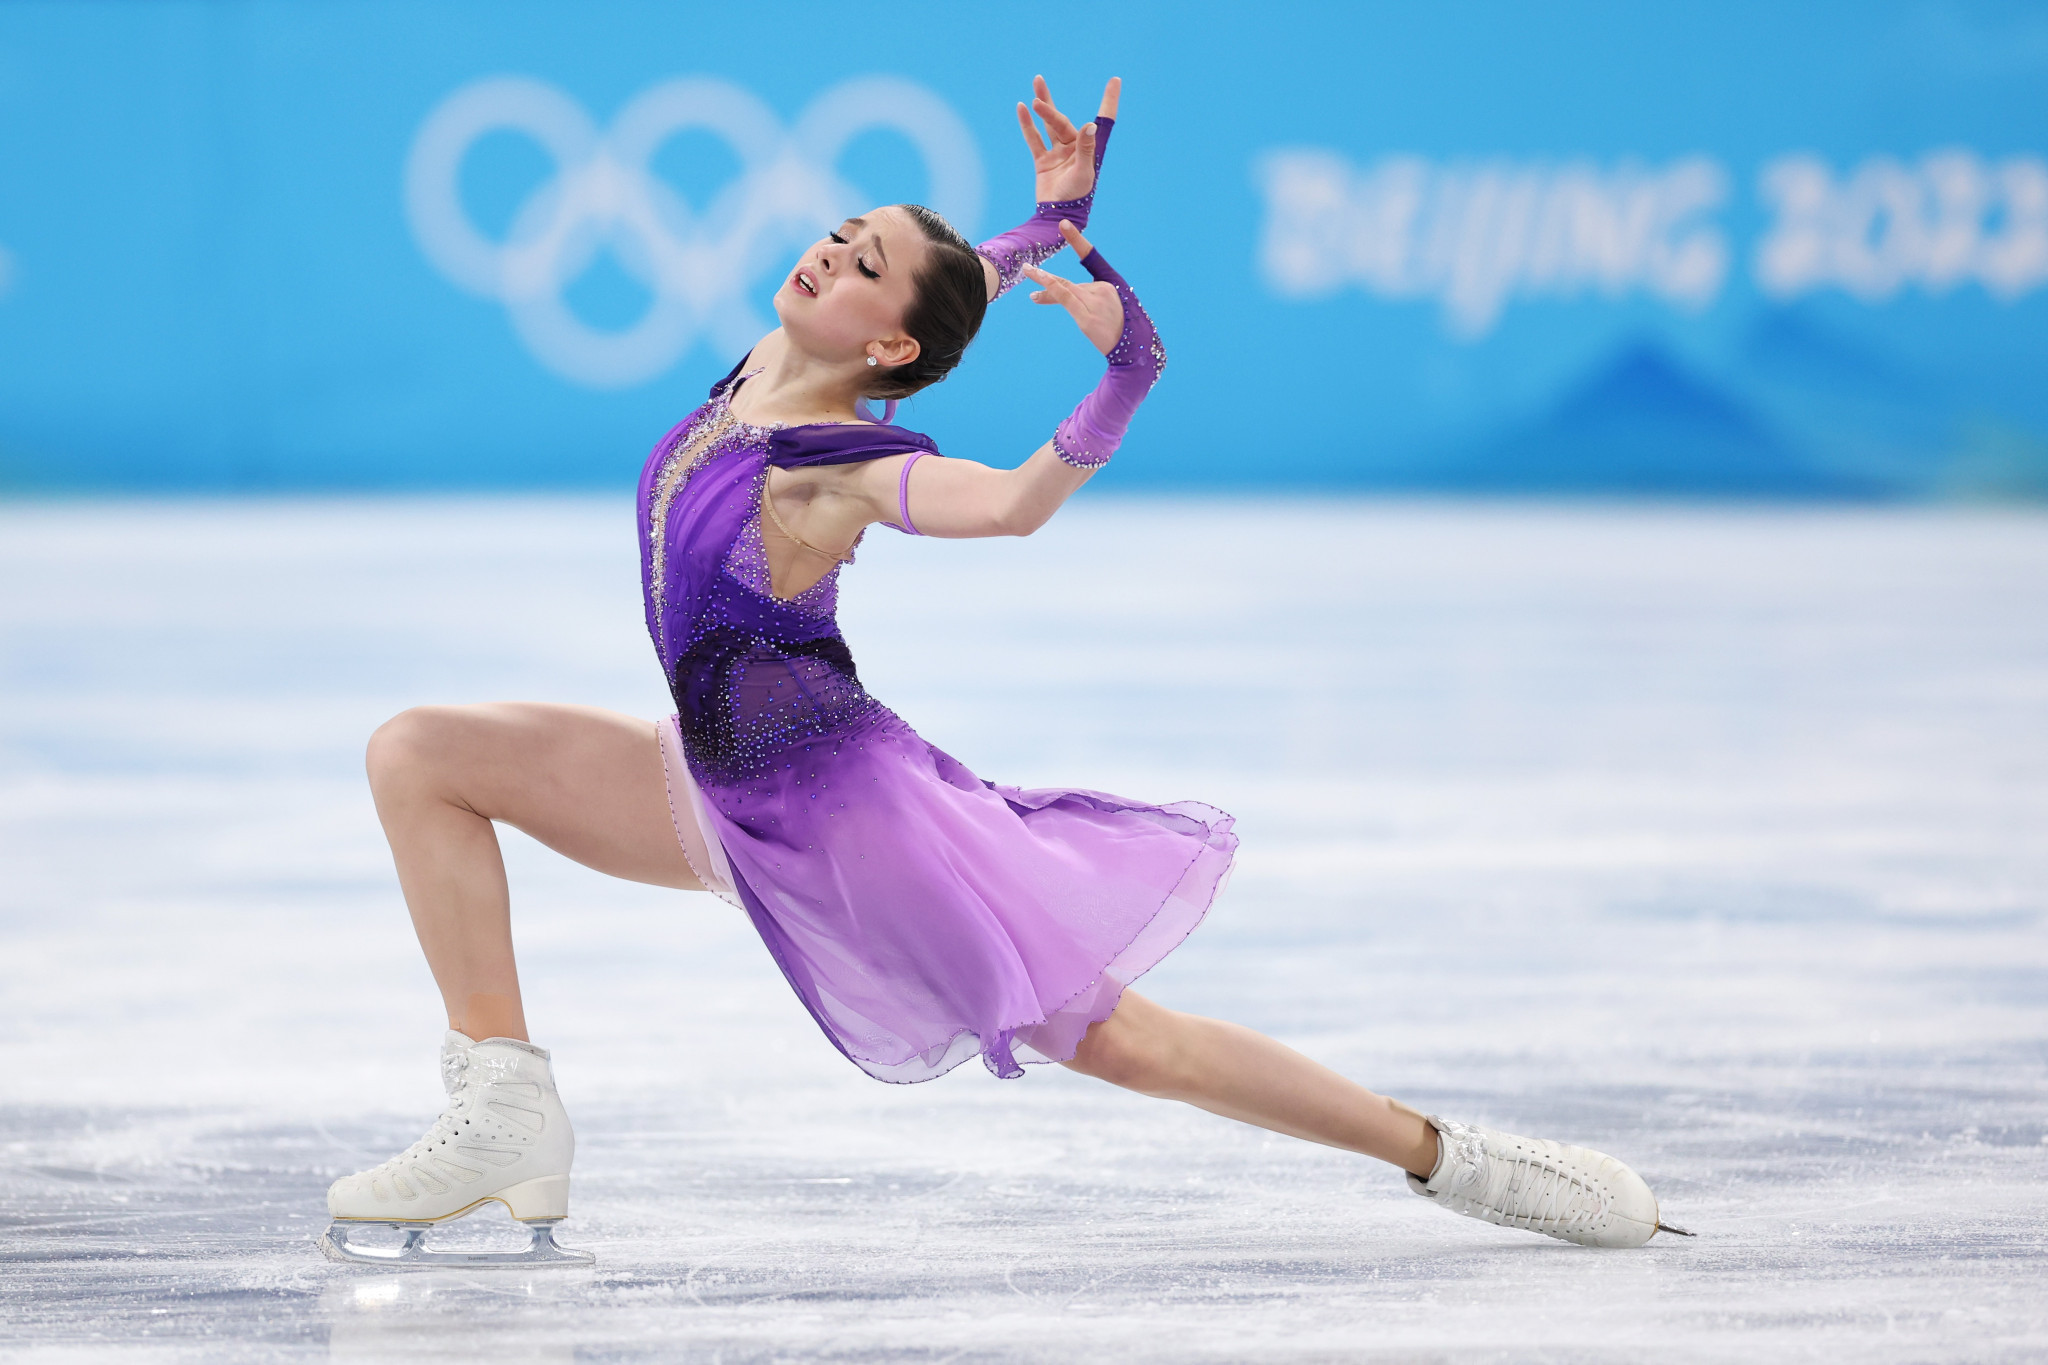 Kamila Valieva is among past gold medallists at the World Junior Figure Skating Championships ©Getty Images